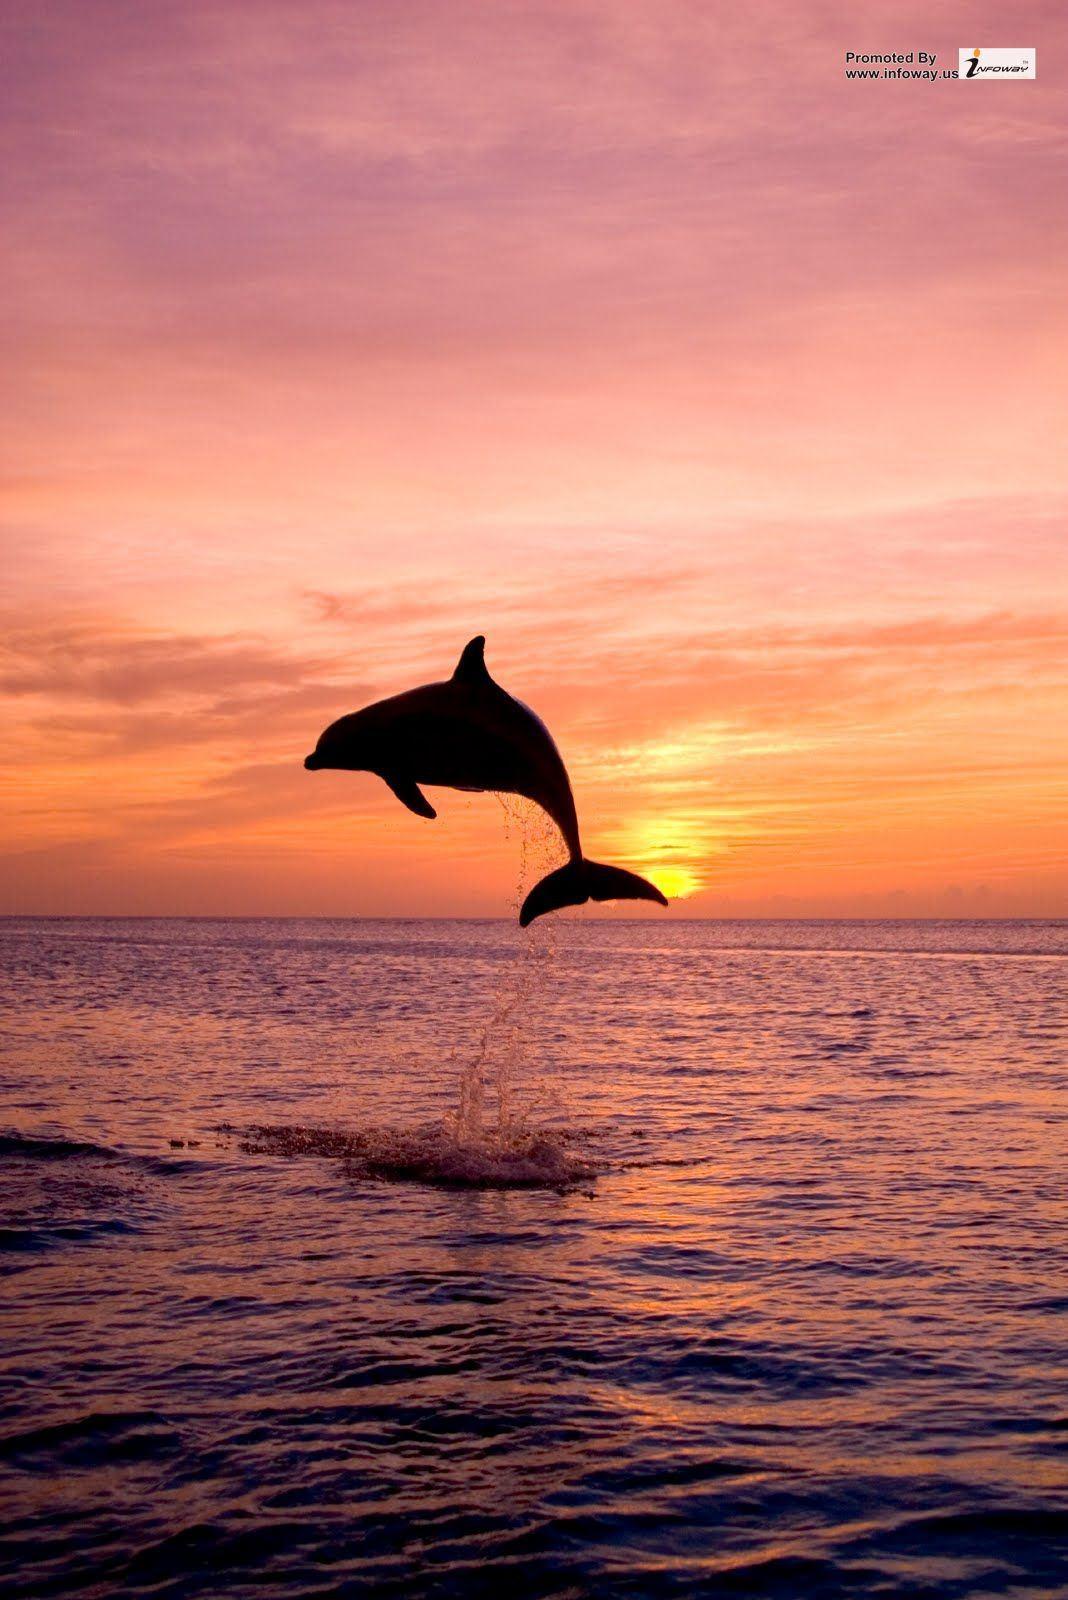 dolphins jumping in the sunset HD wallpaper. Sunrises and Sunsets